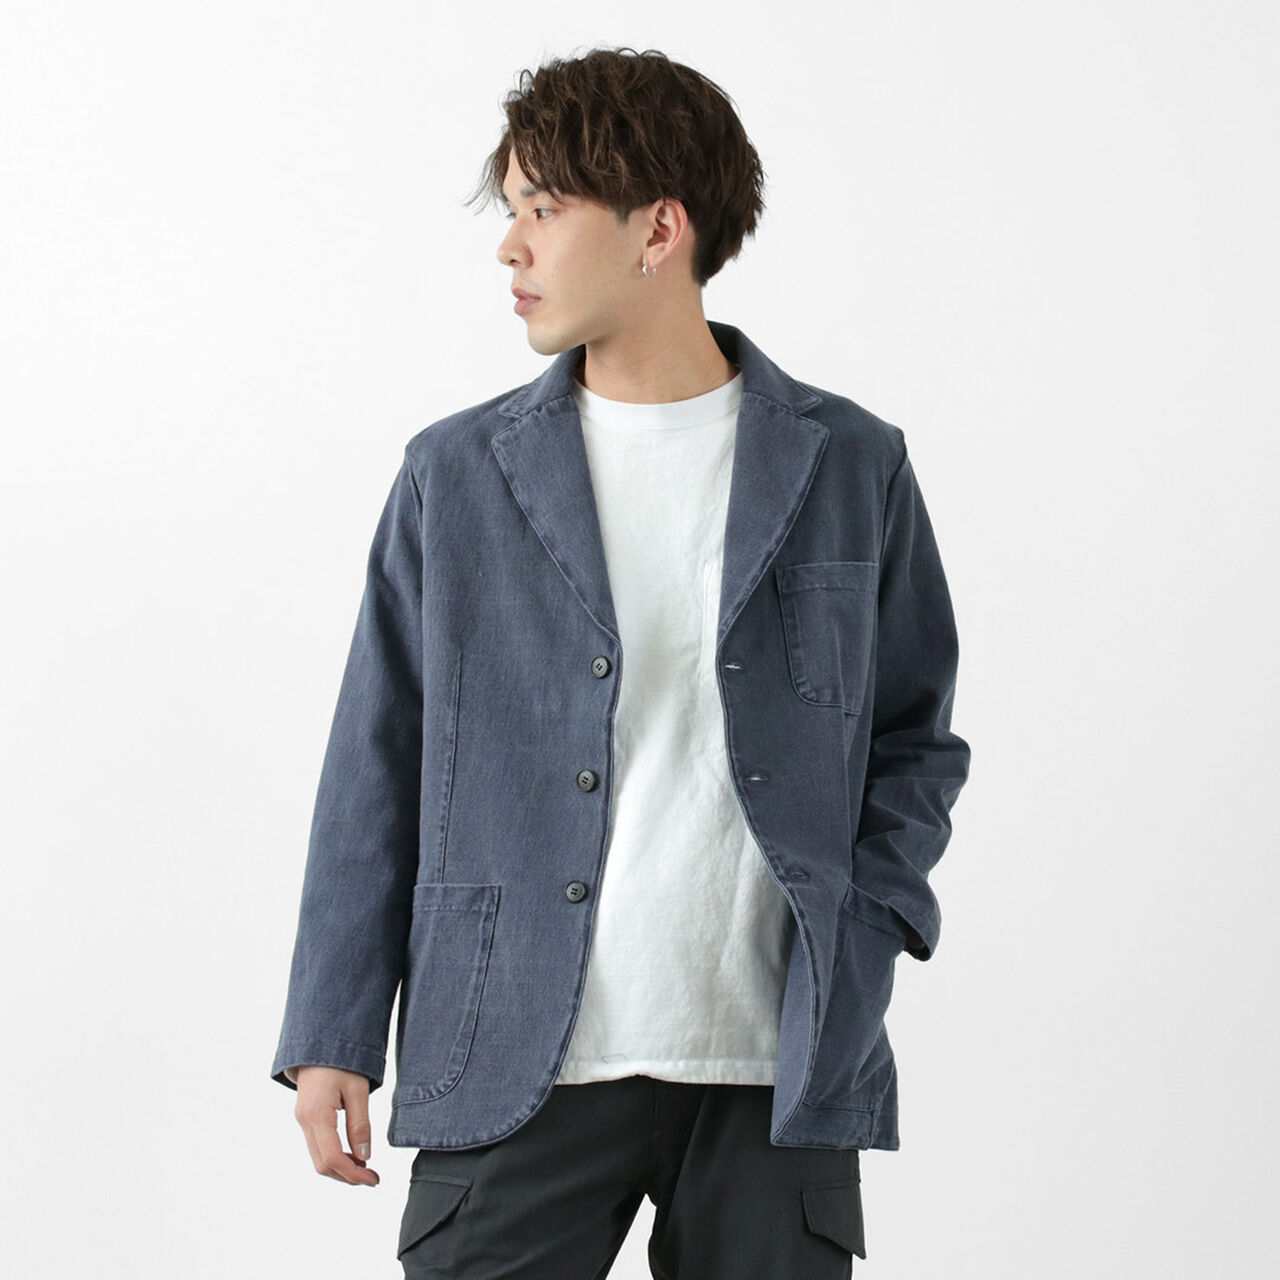 Heavy Jersey Tailored Jacket,P-Navy, large image number 0